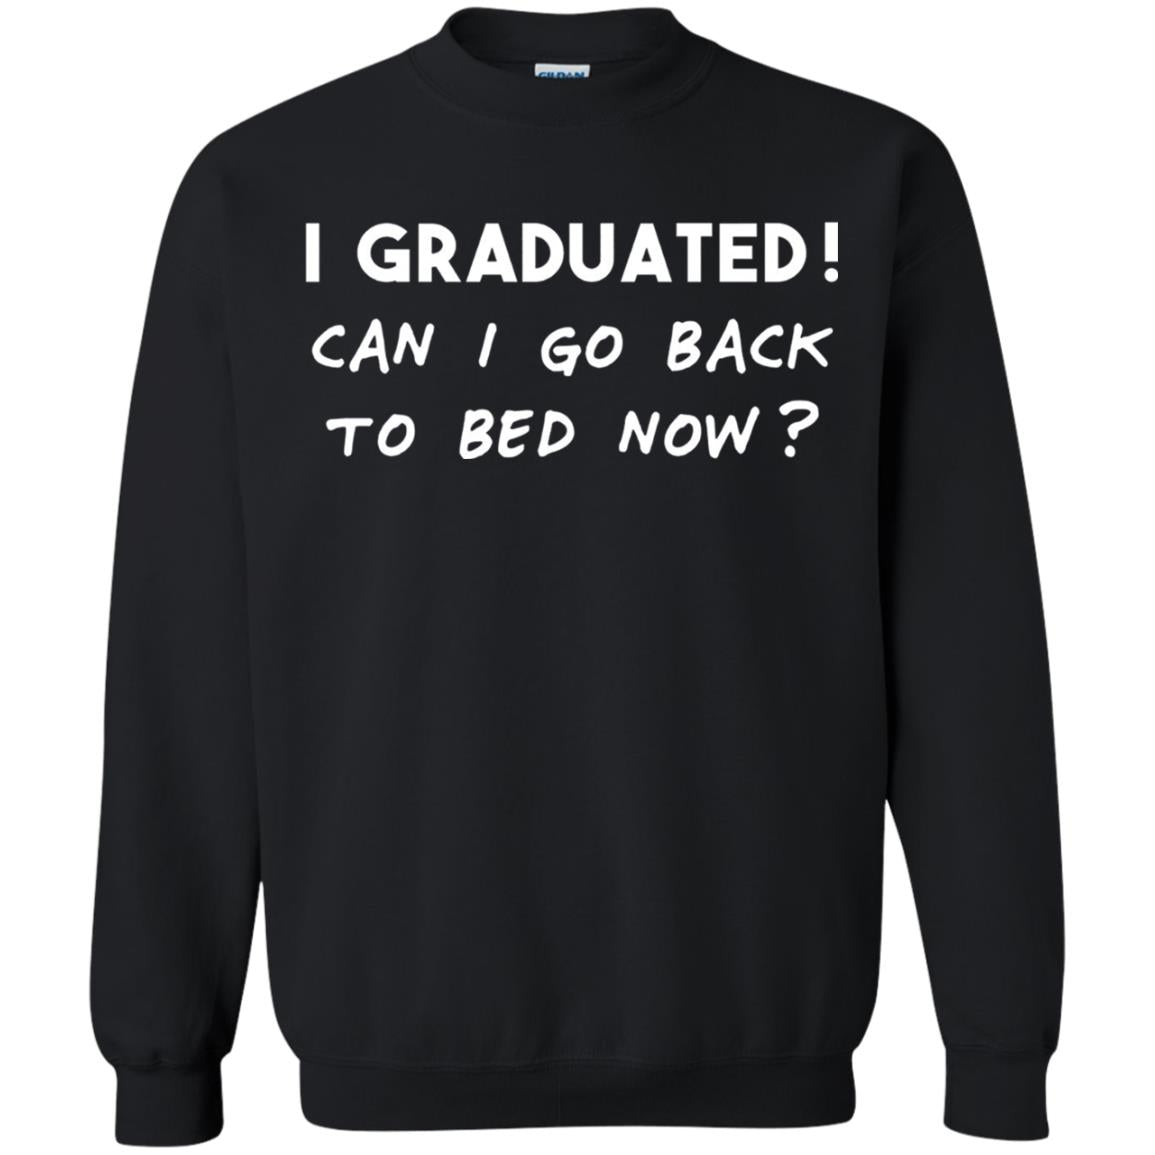 I Graduated Can I Go Back To Bed Shirt